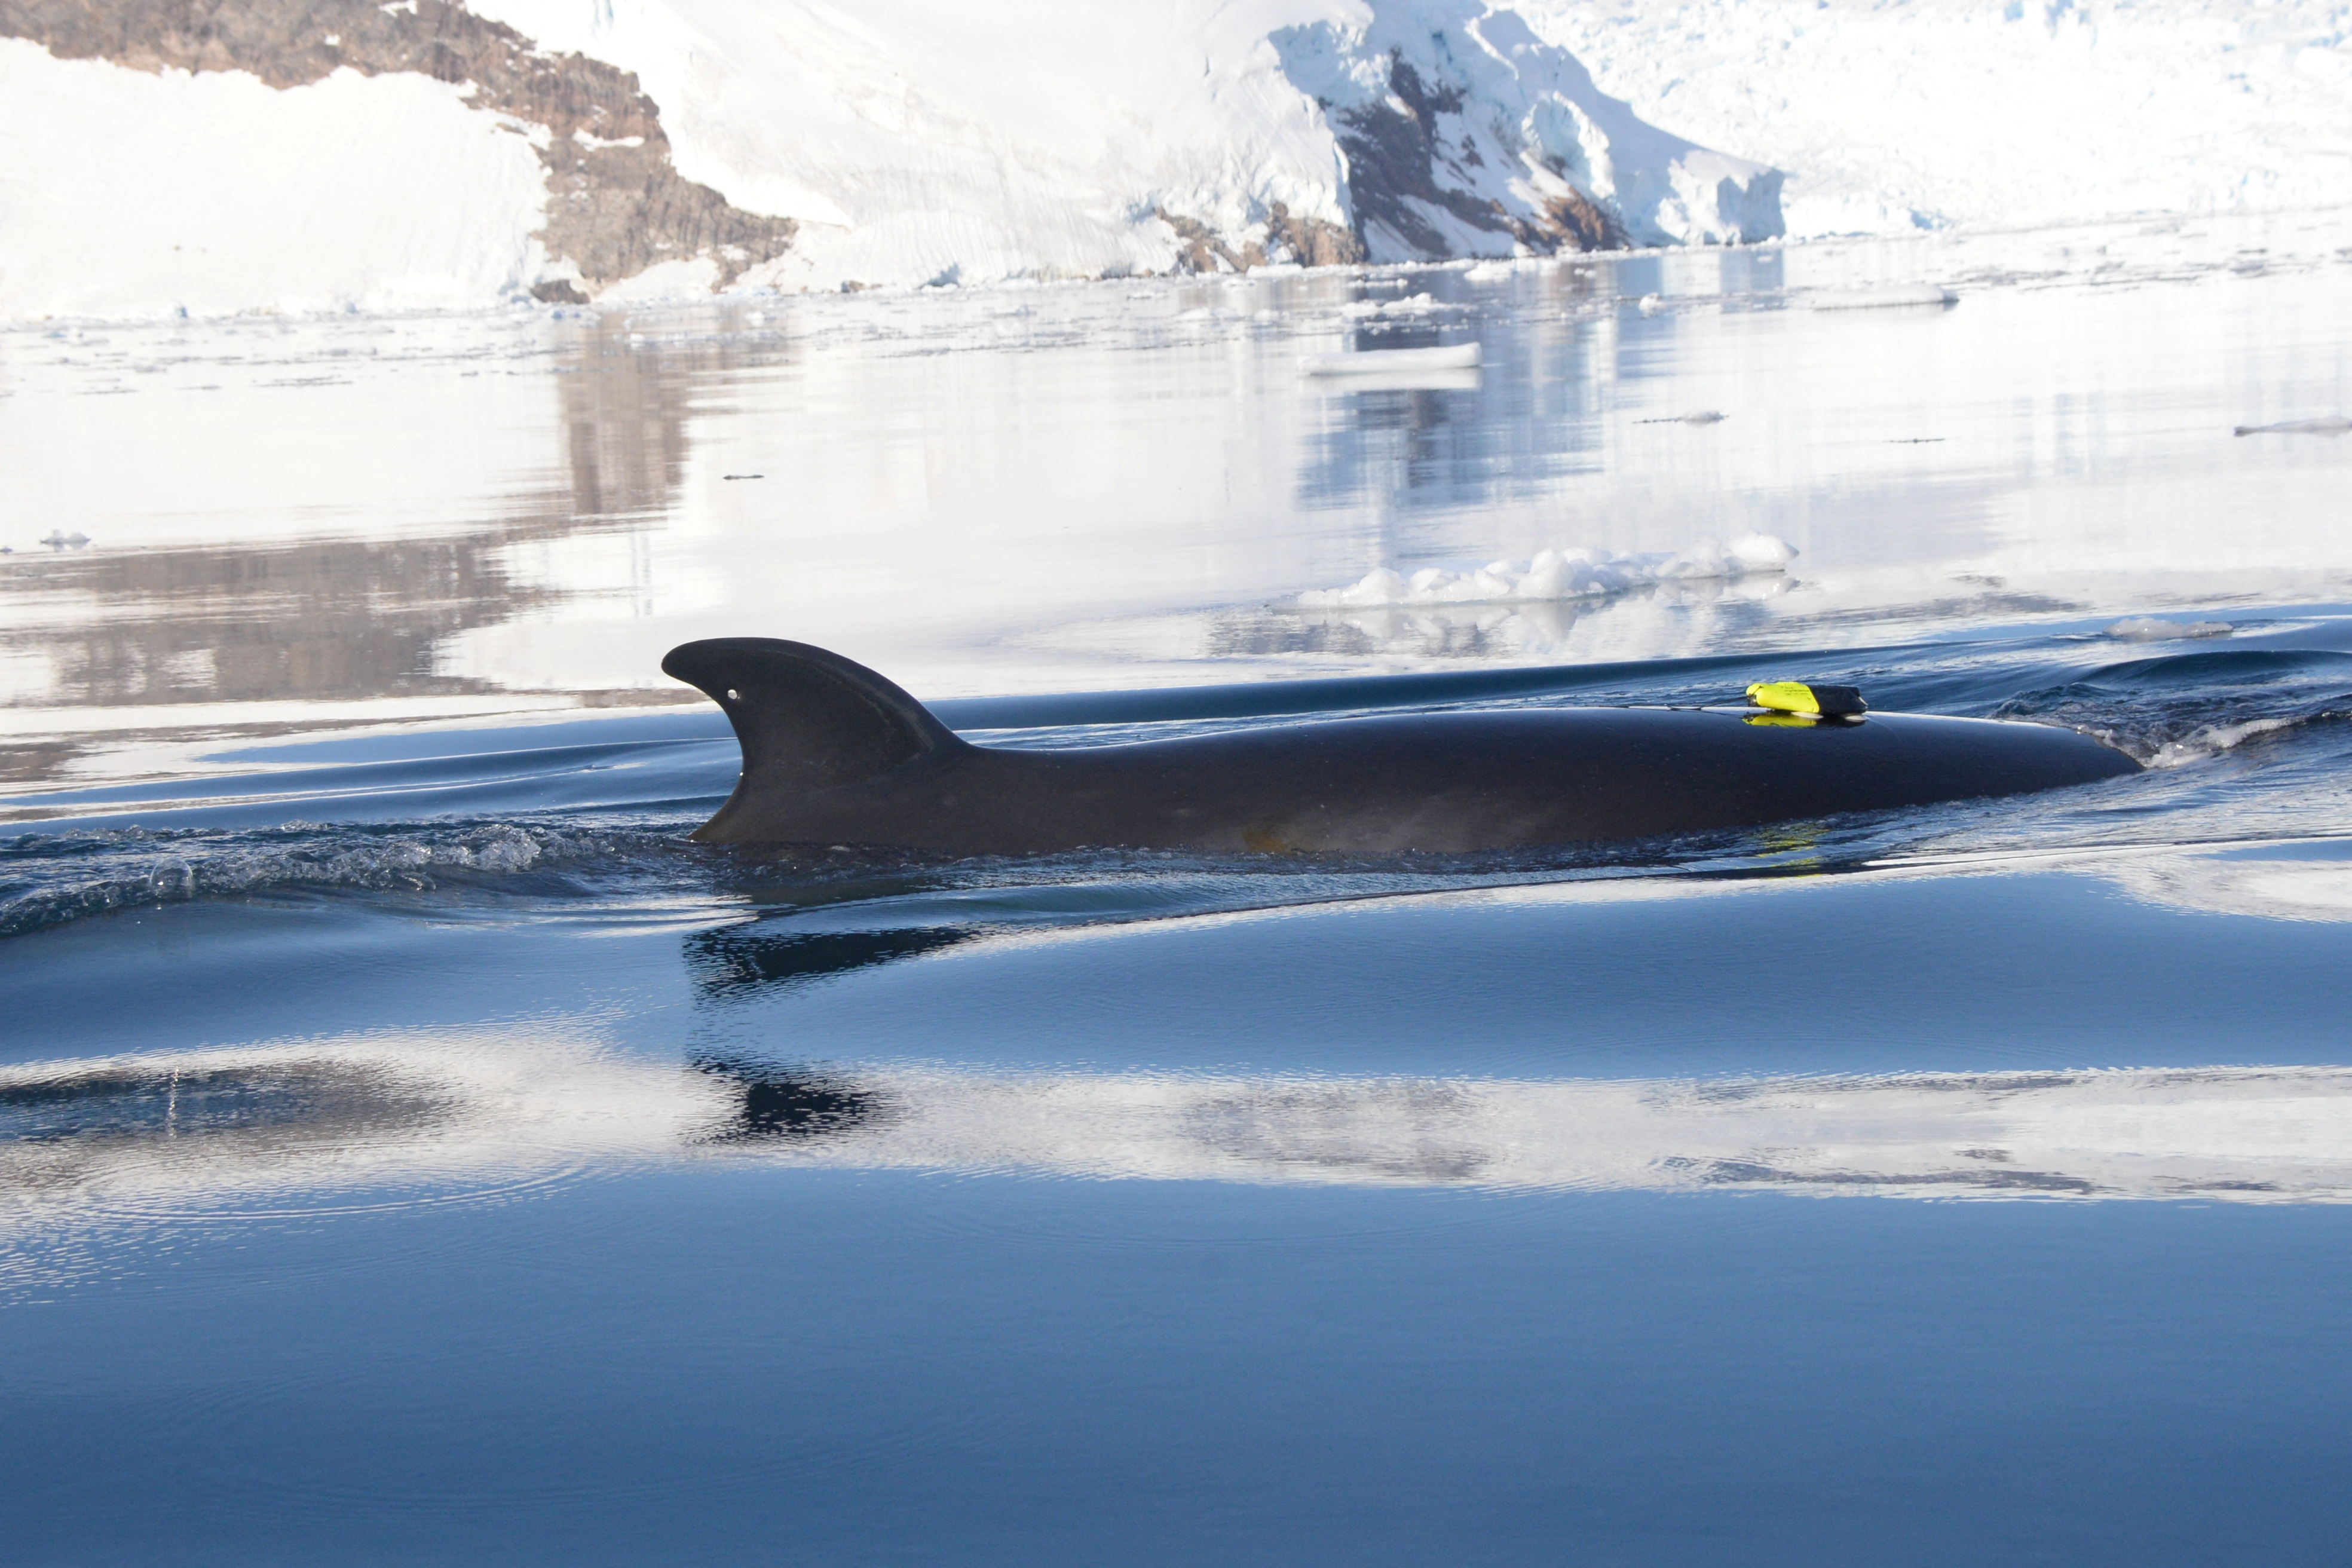 An Antarctic minke whale is seen in the waters off the West Antarctic Peninsula